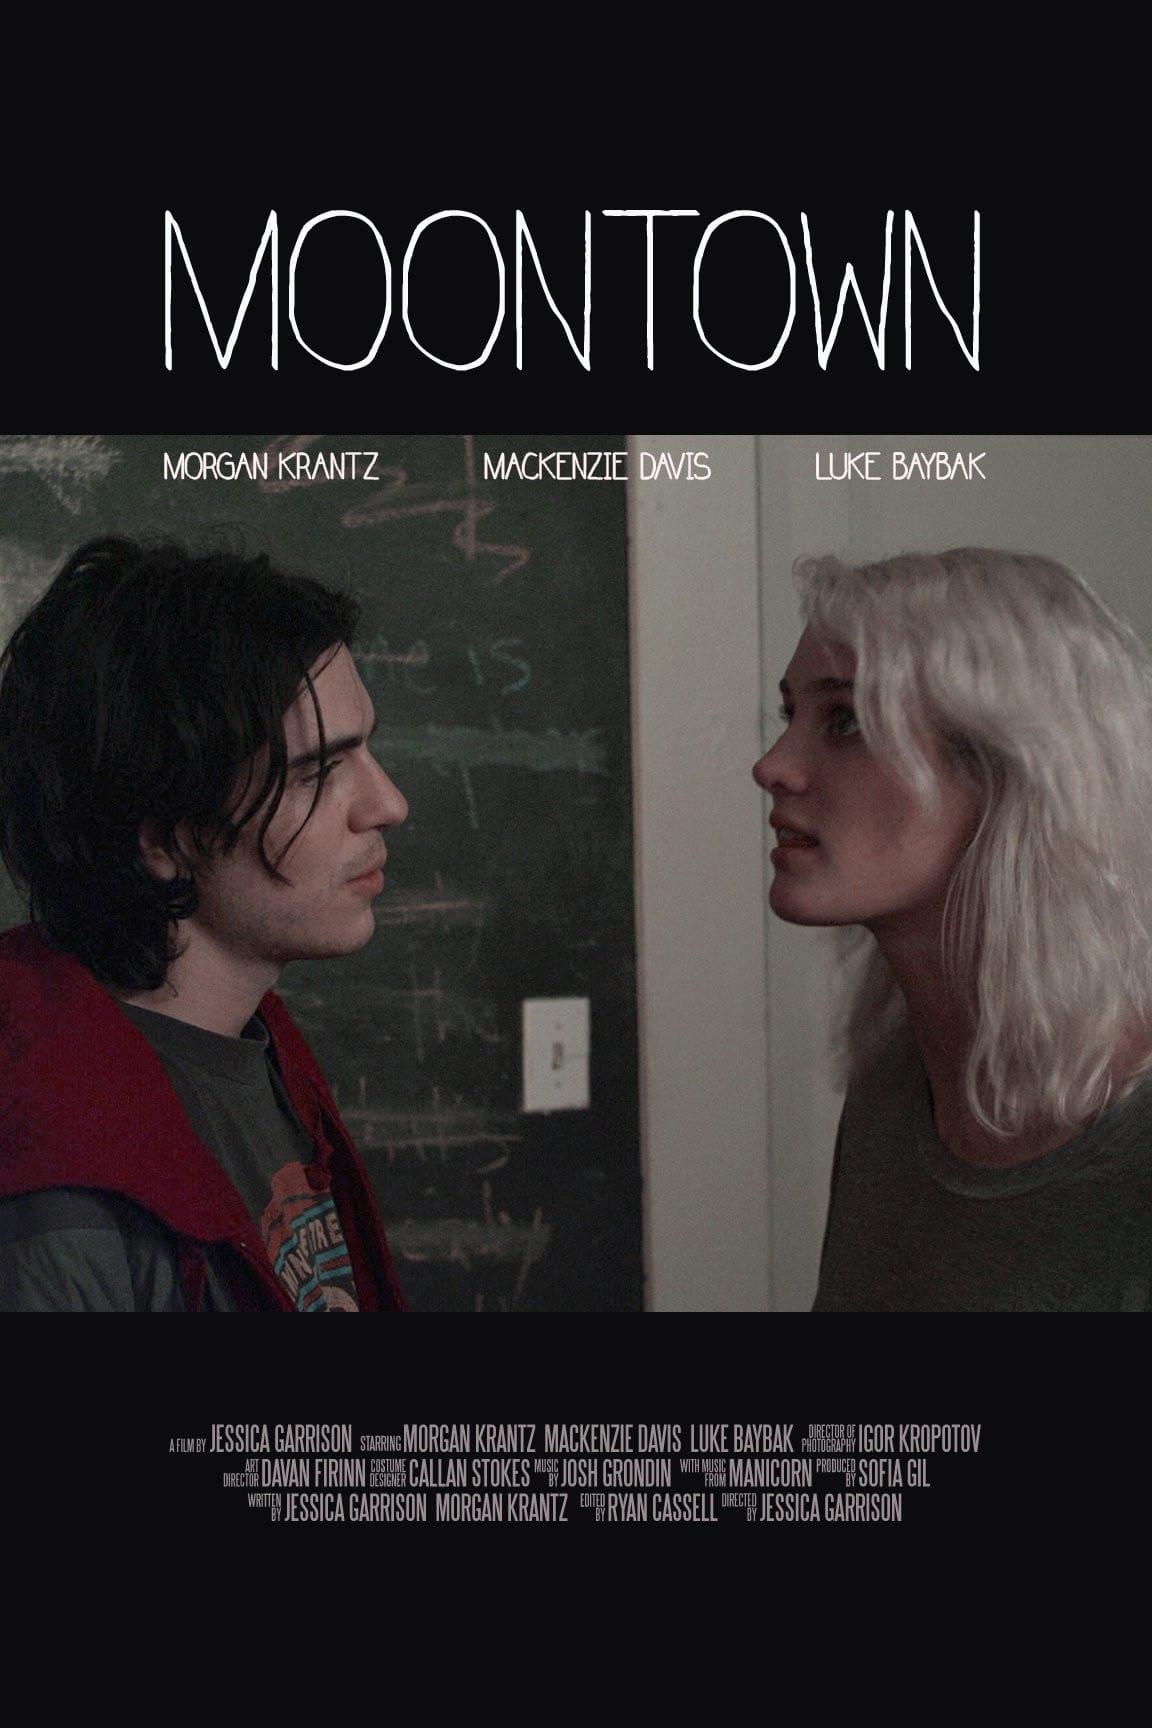 Moontown poster